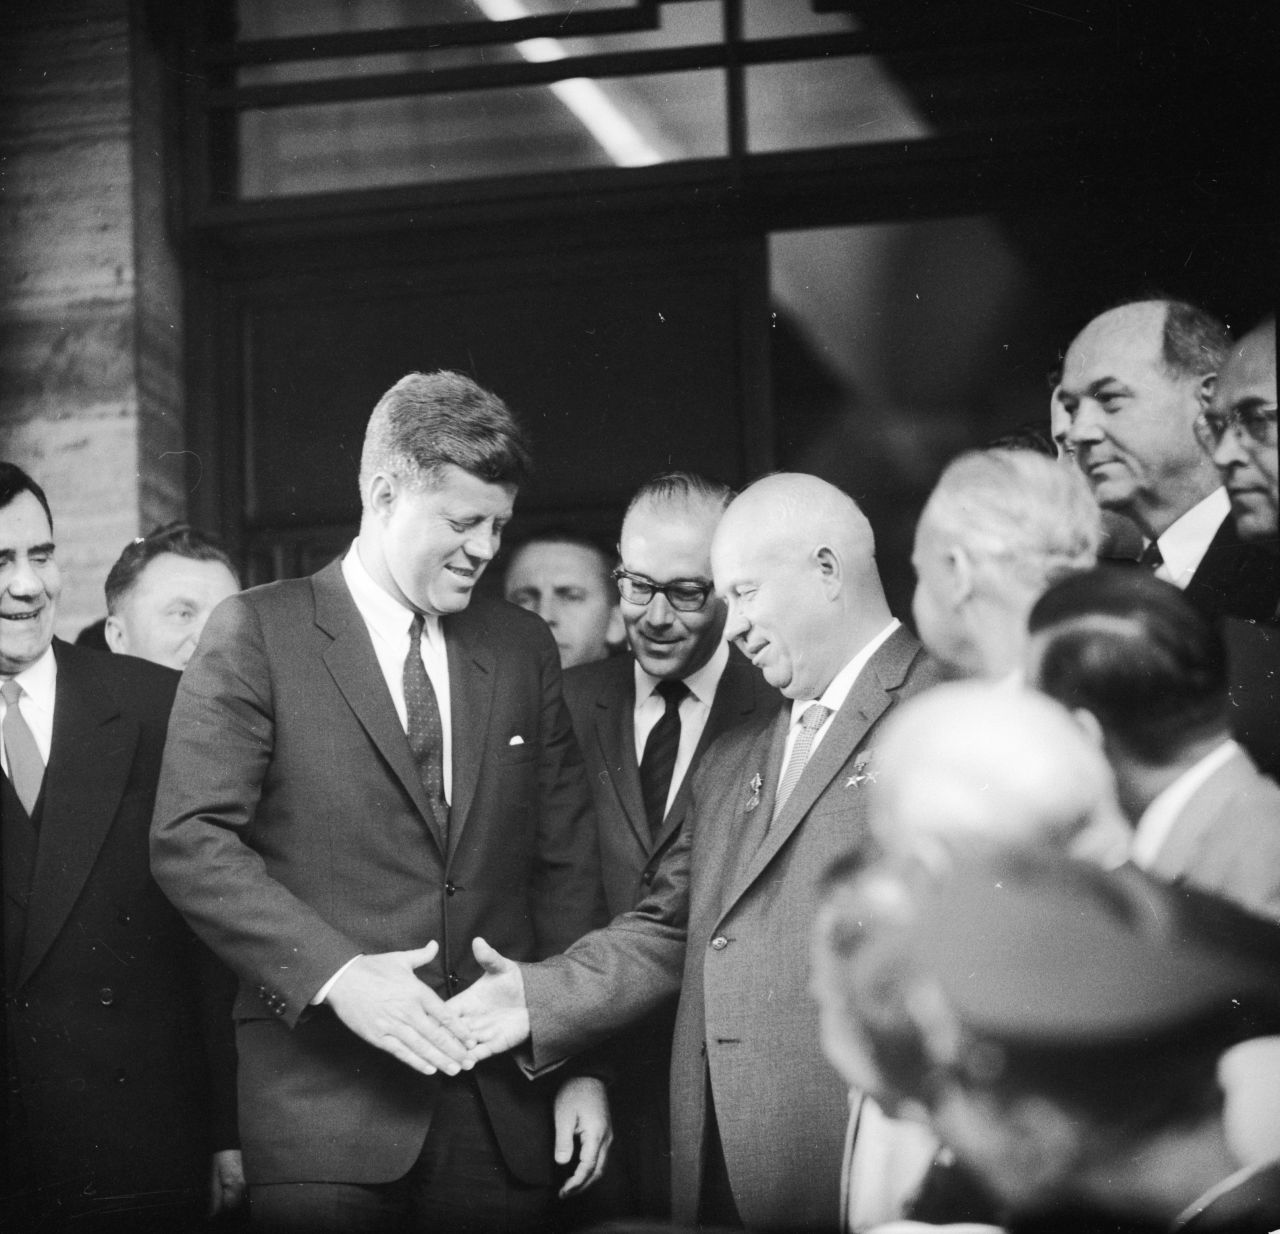 U.S. President John F. Kennedy, left, shakes hands with Soviet leader Nikita Khrushchev at the U.S. Embassy in Vienna, Austria, on June 3, 1961, while meeting for talks. 